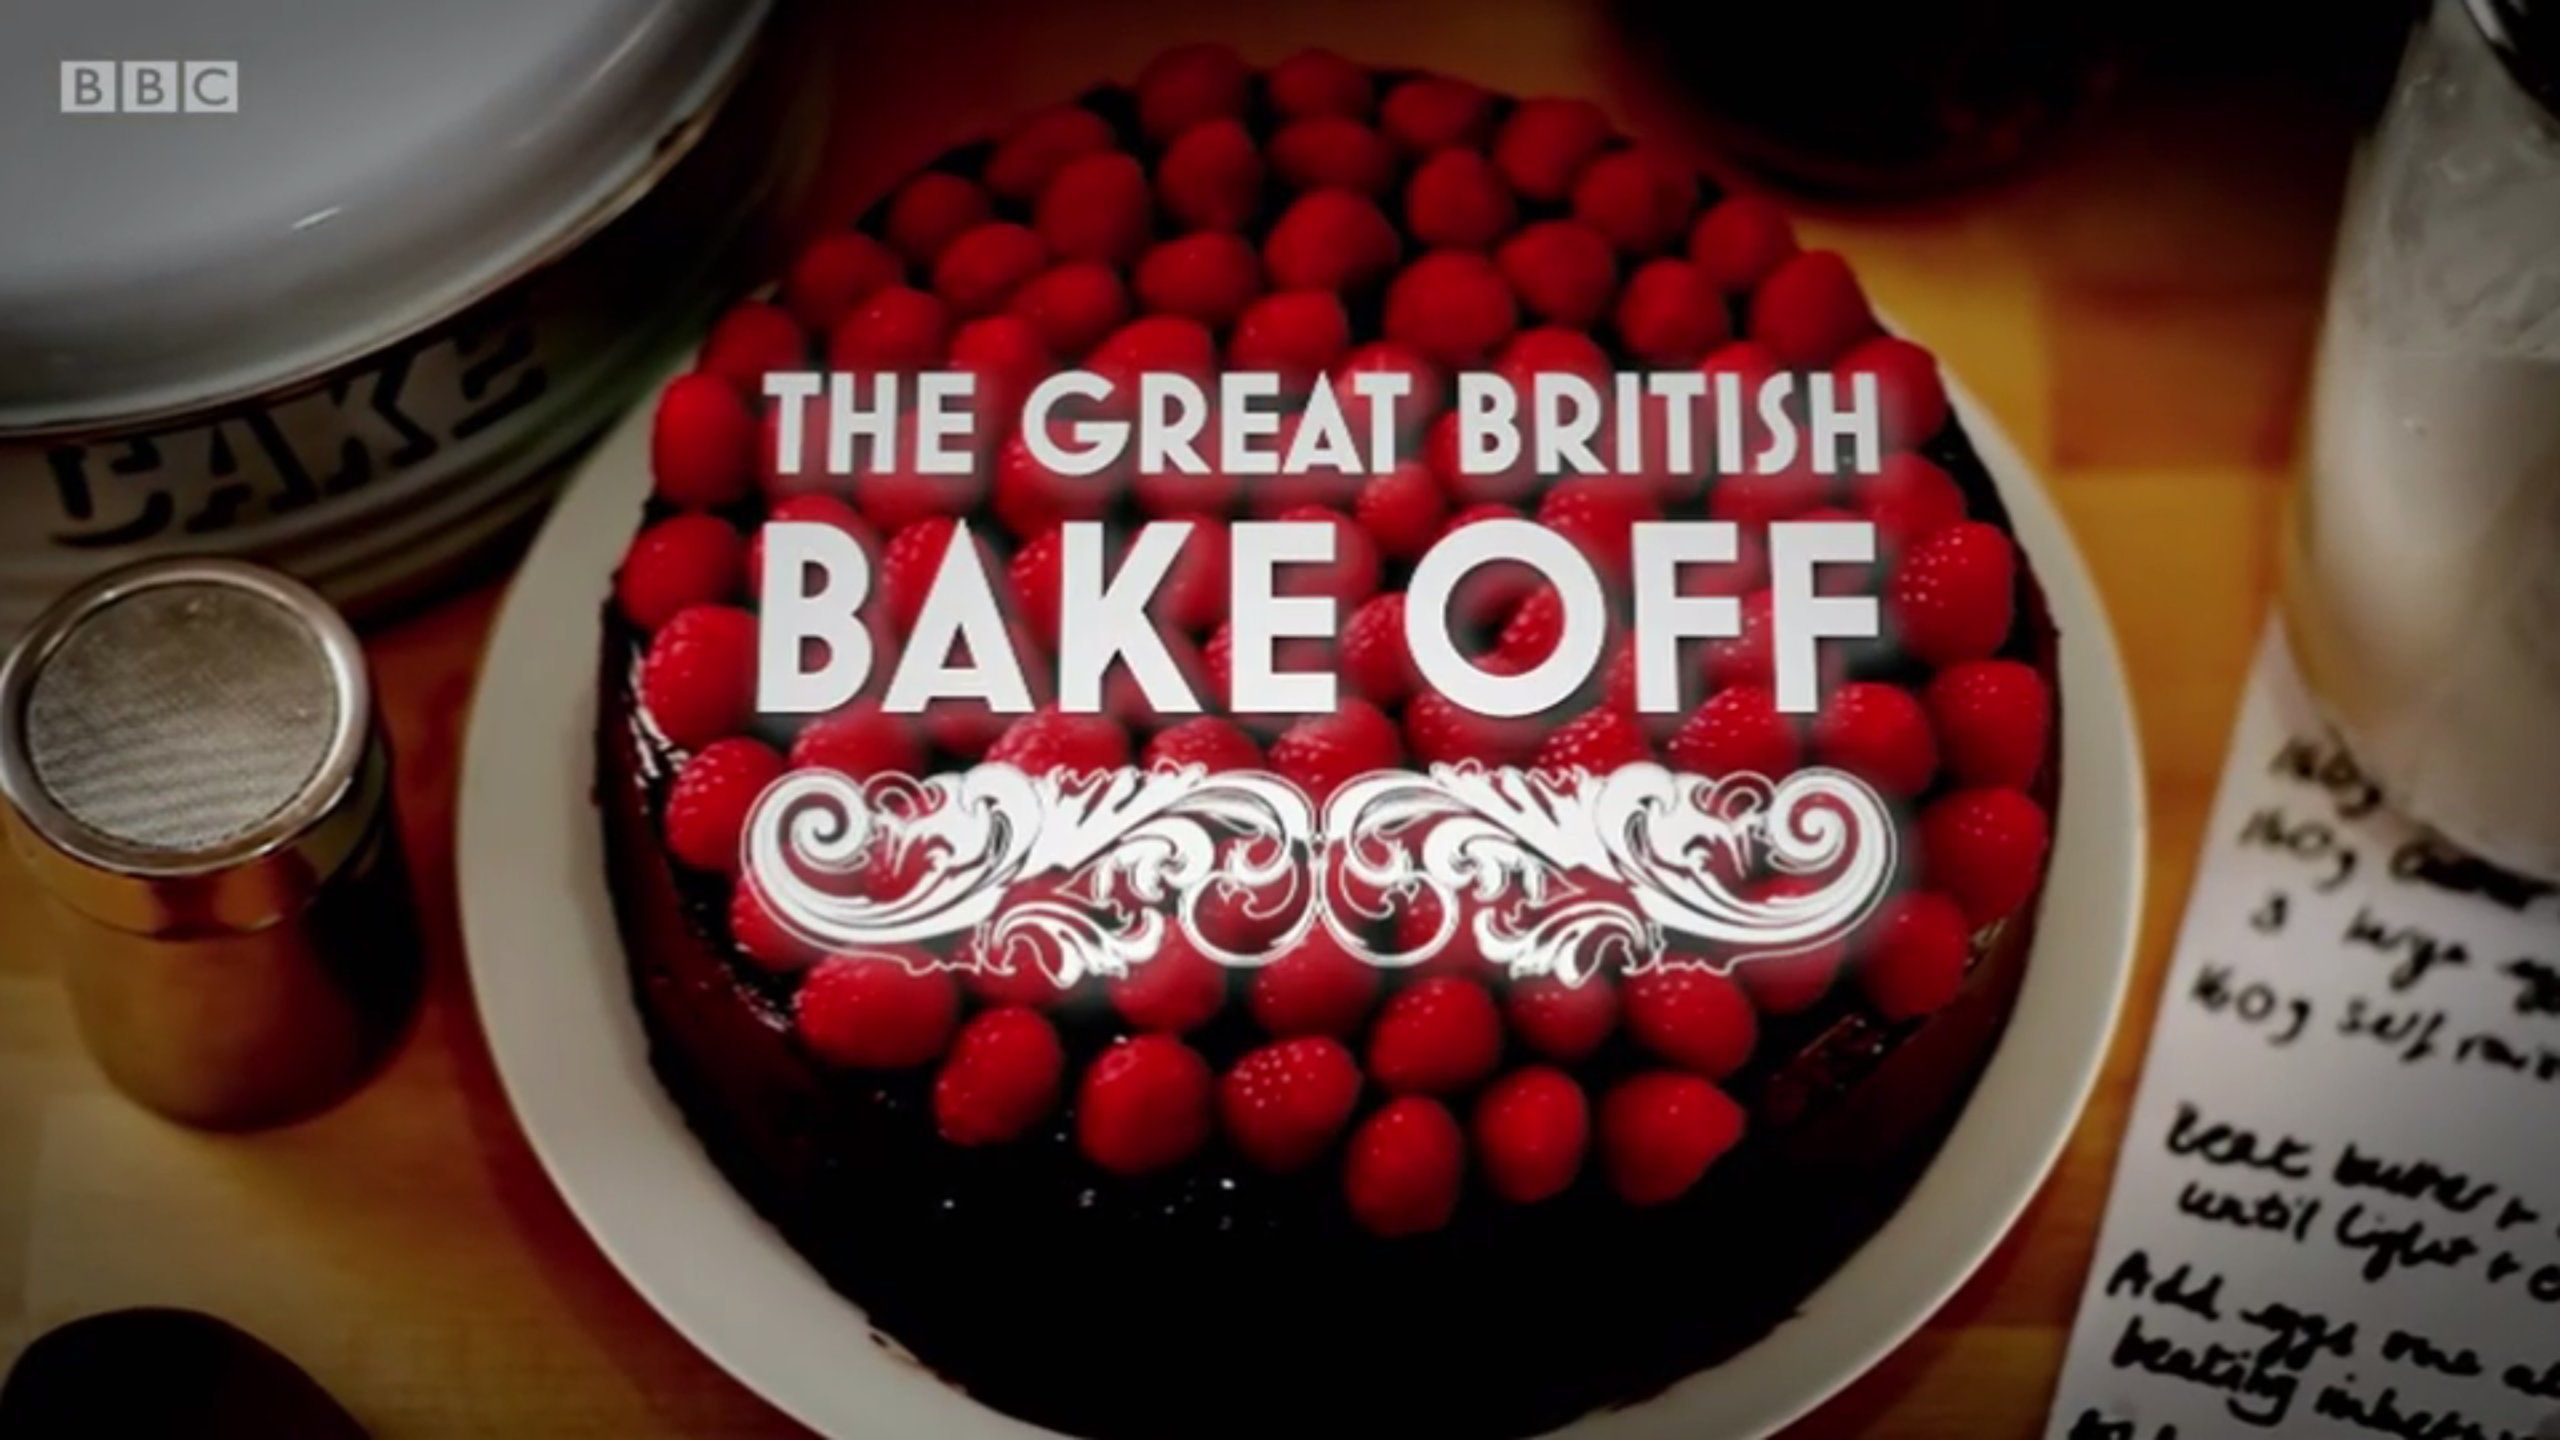 ‘The Great British Bake-Off’ Is Filming A New Season To Premiere Later This Year